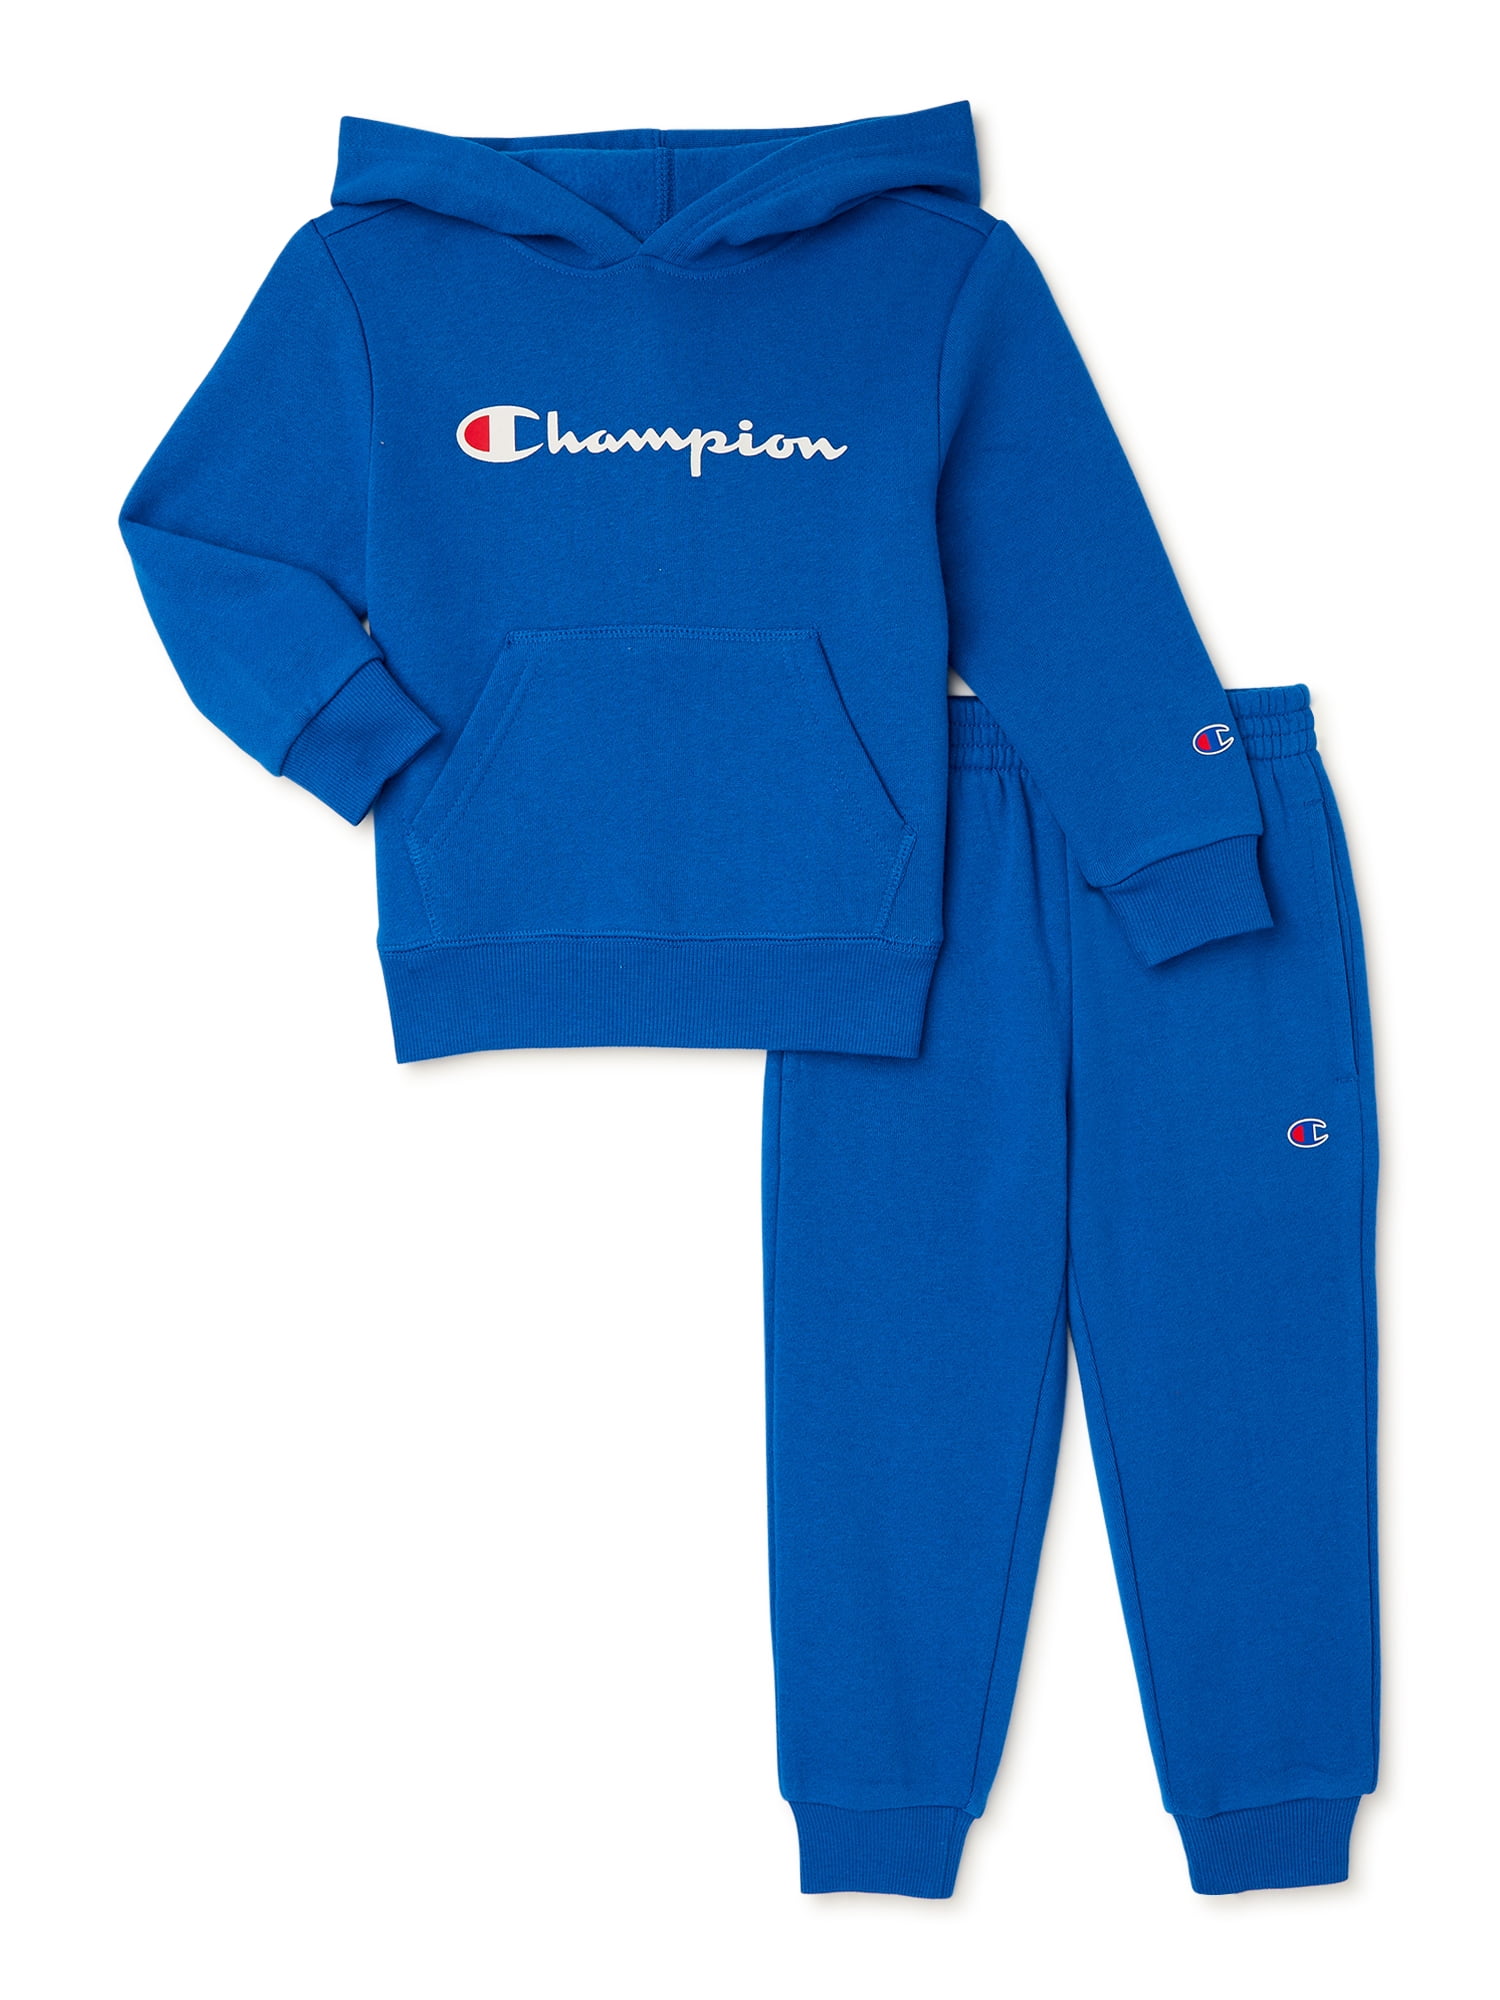 Champion Toddler Boys\' Matching Size 2-Piece, Hoodie Jogger 2T-4T and Set